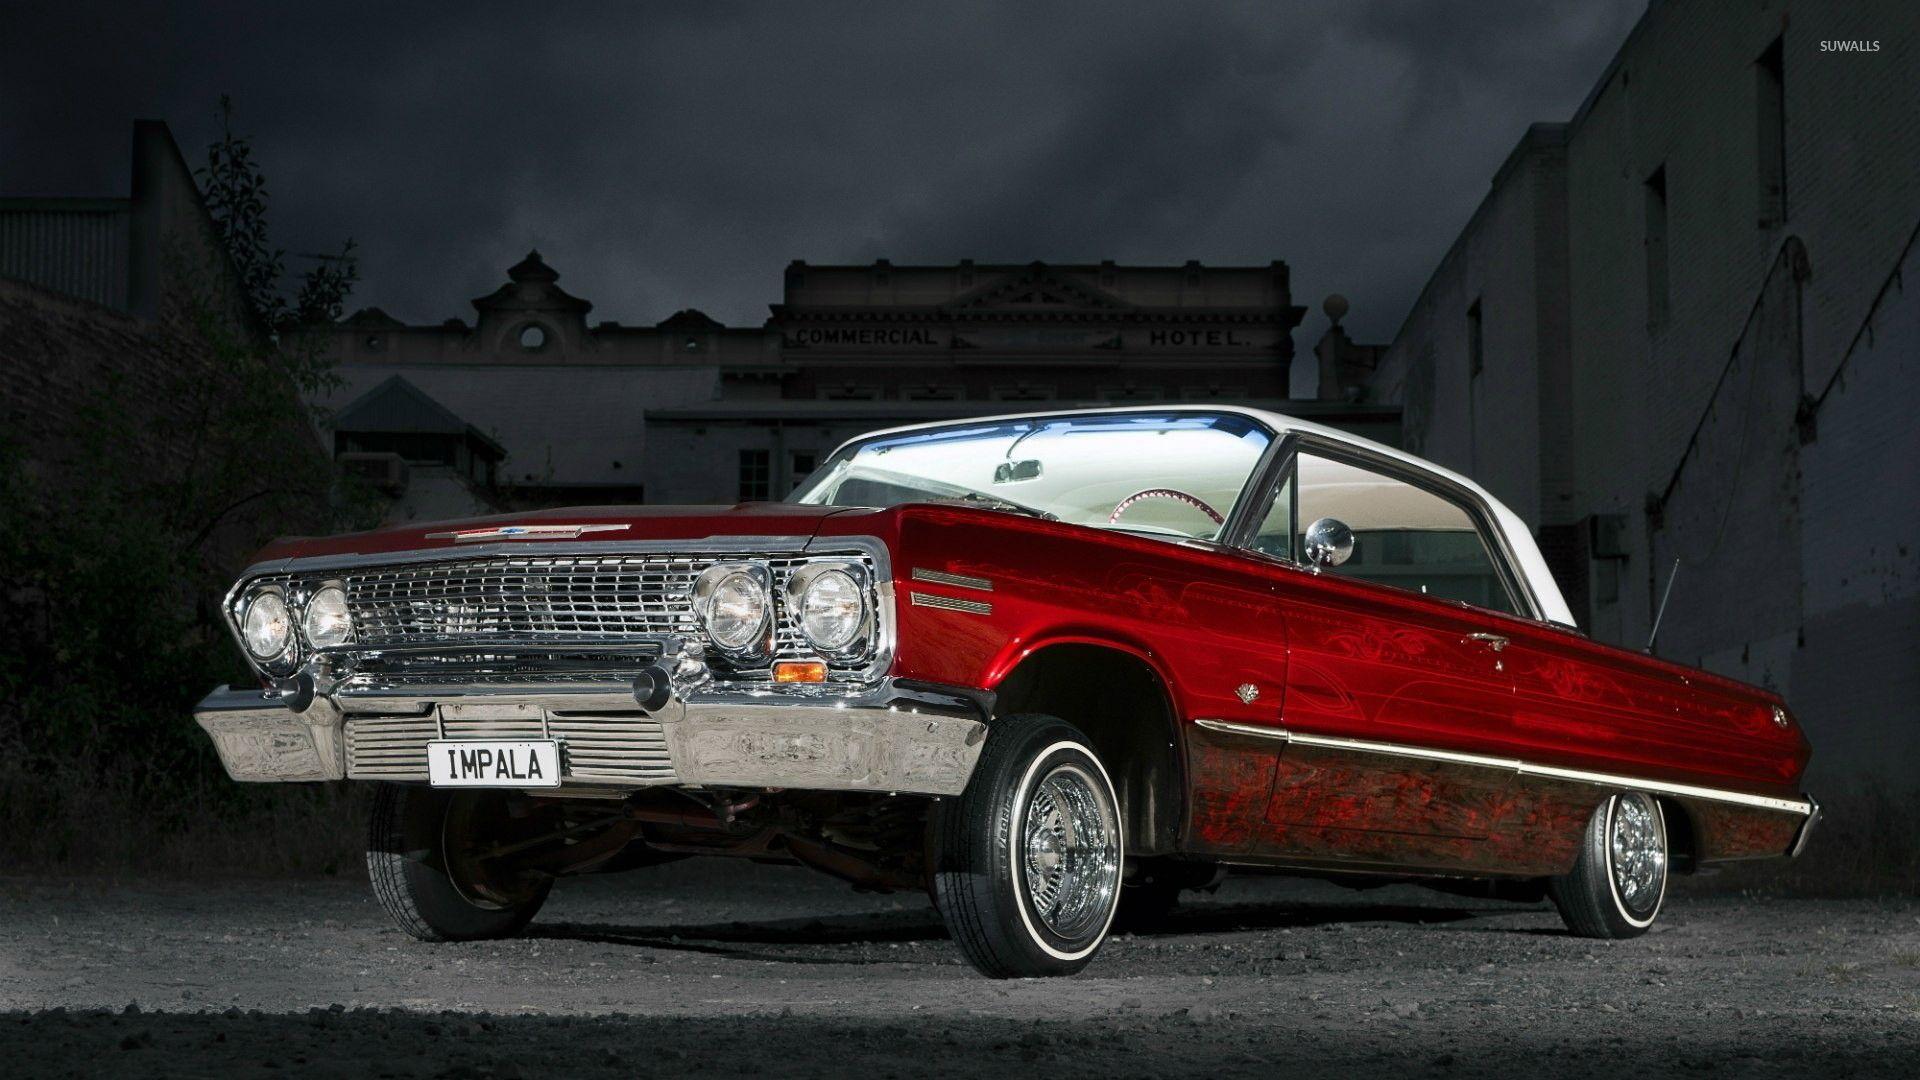 Chevrolet Impala Wallpaper and Background Image